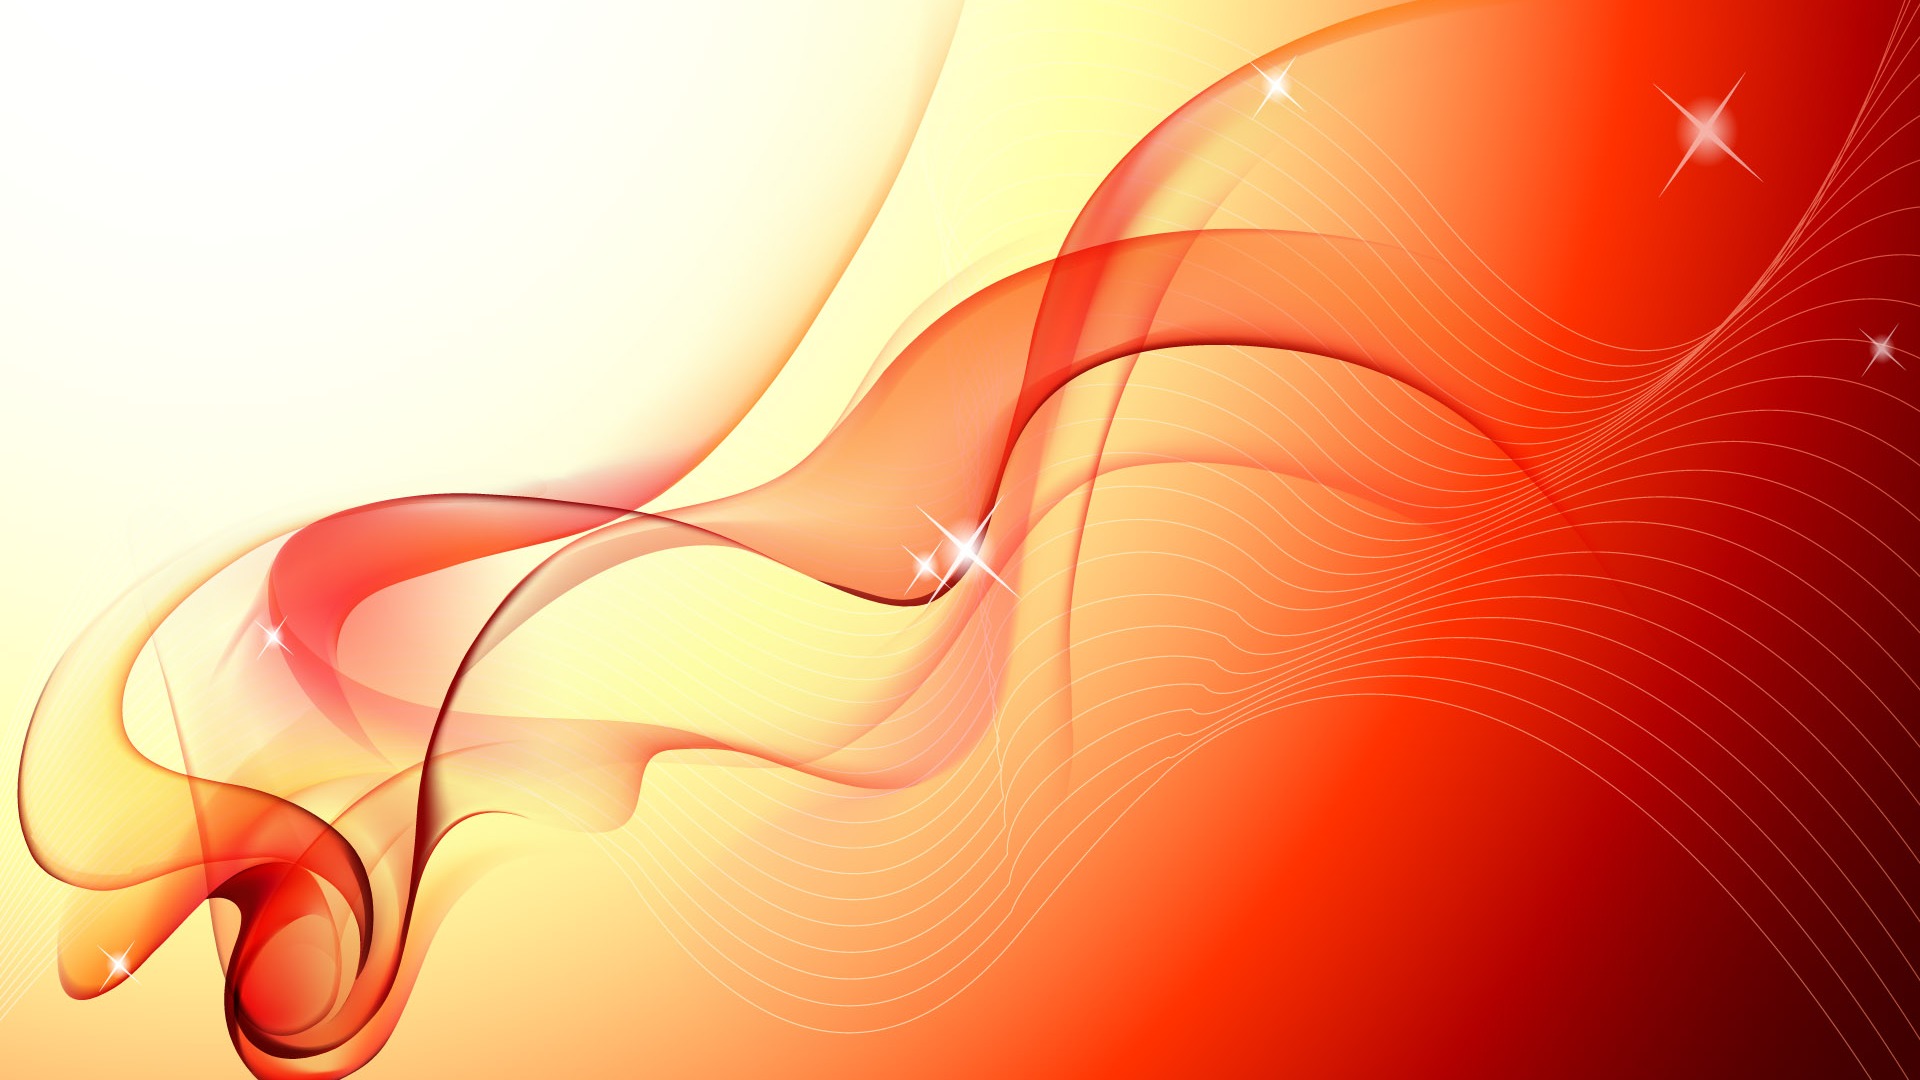 Colorful vector background wallpaper (1) #19 - 1920x1080